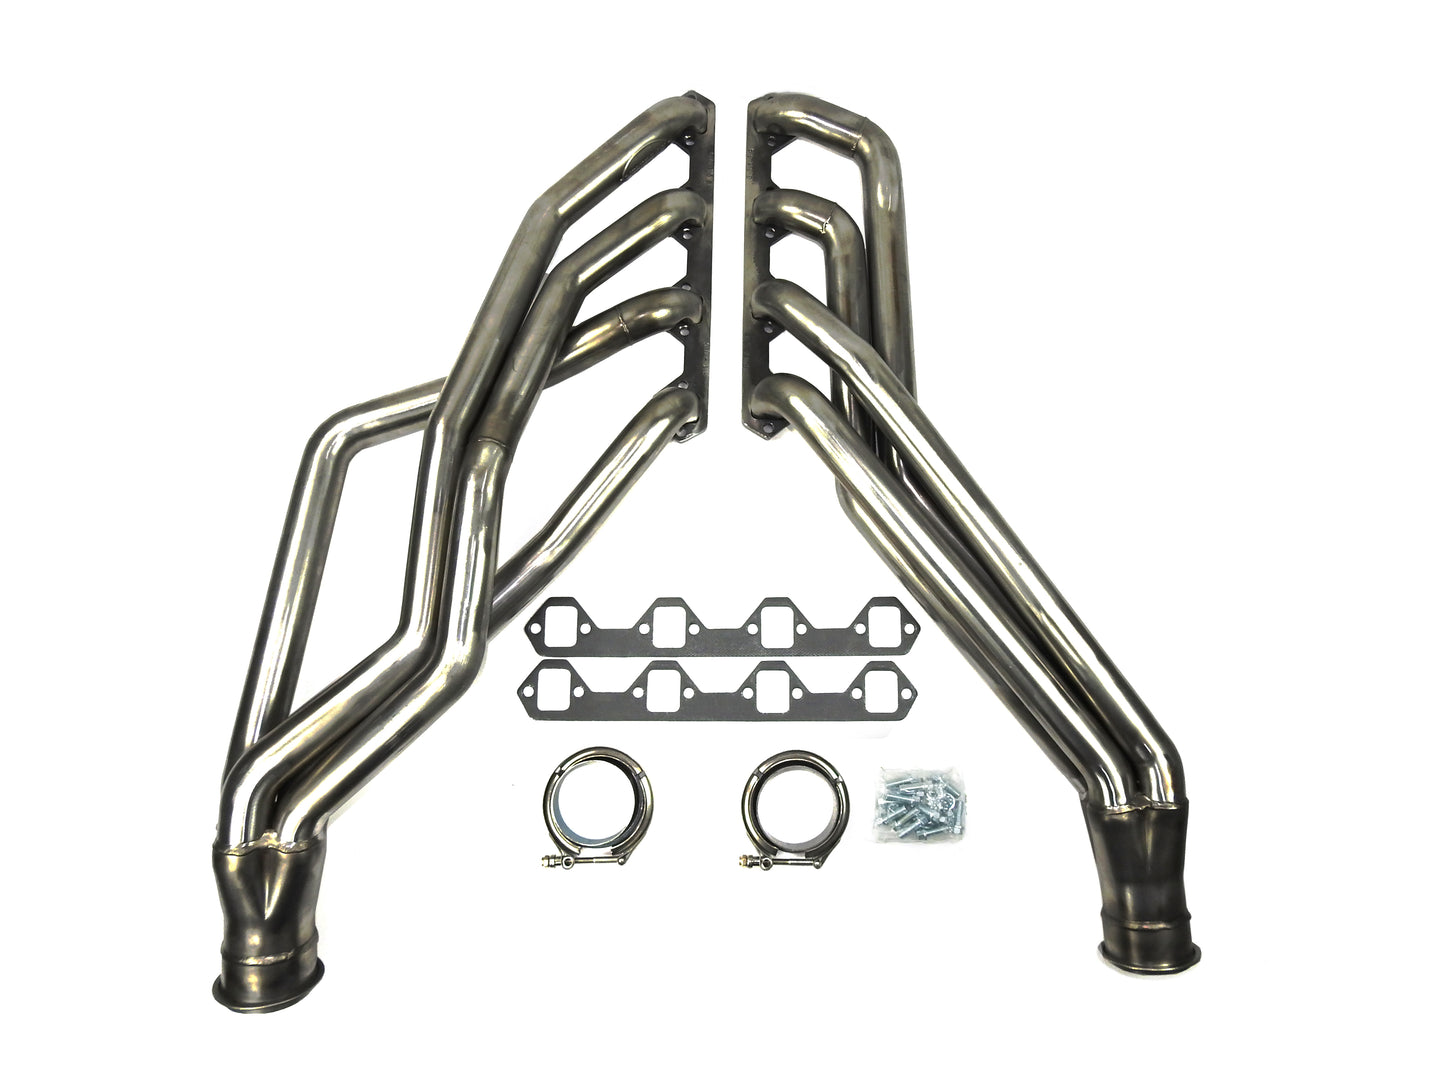 JBA Performance Exhaust 6616S 1 3/4" Header Long Tube Stainless Steel 65-73 Mustang 351W Fits with Borgeson Box